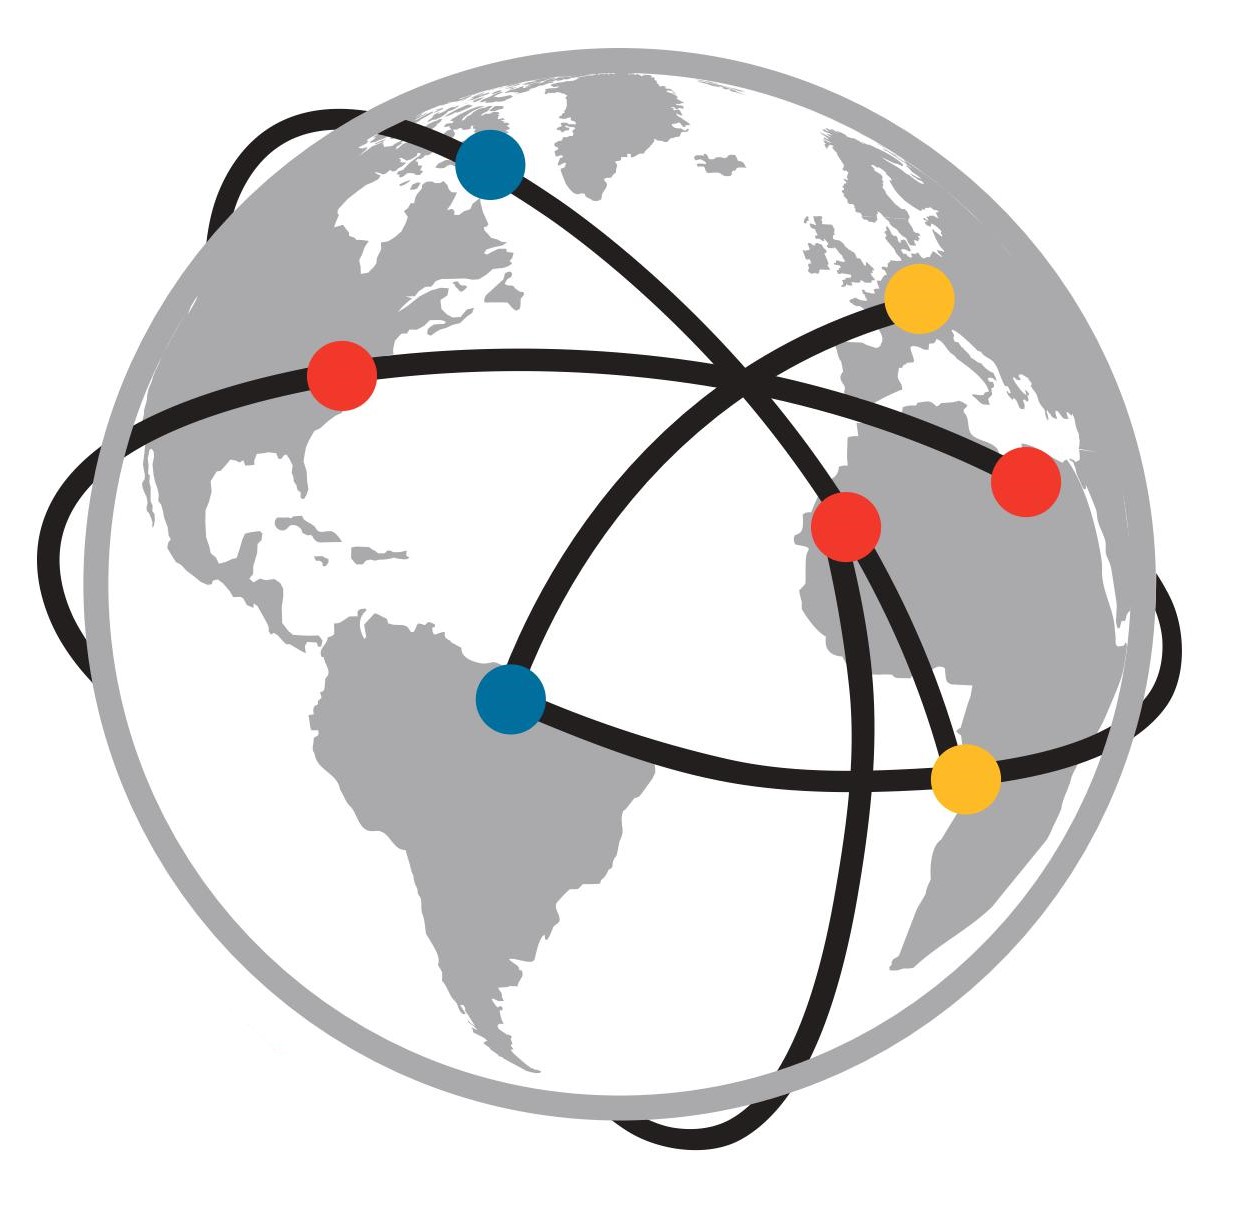 Graphic of a globe with lines connecting different continents